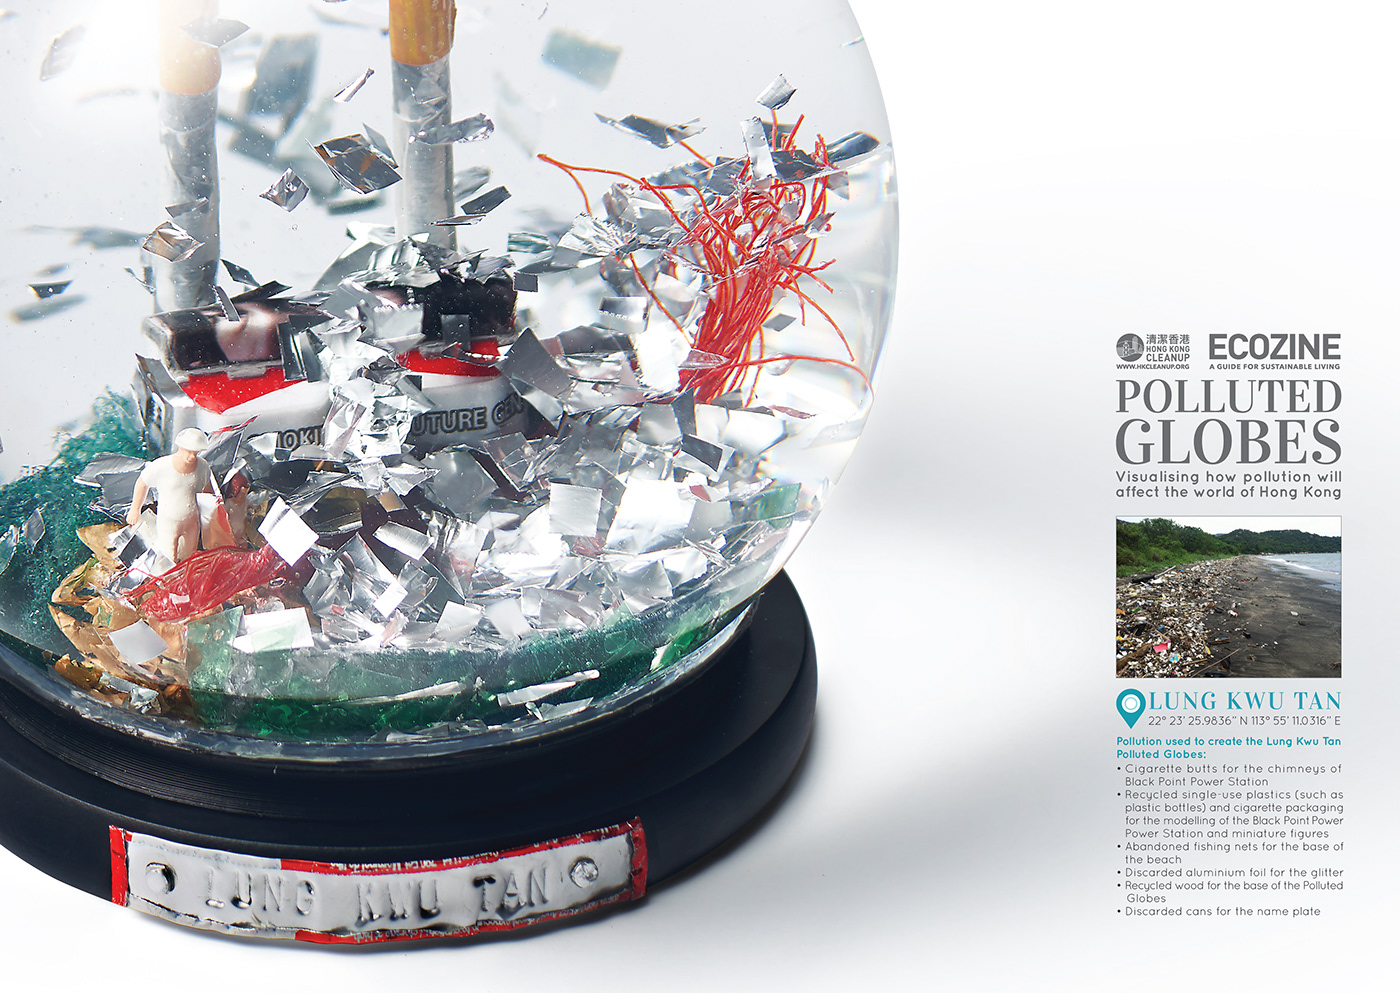 pollutedglobes HKCleanup ecozine pollution polluted globes